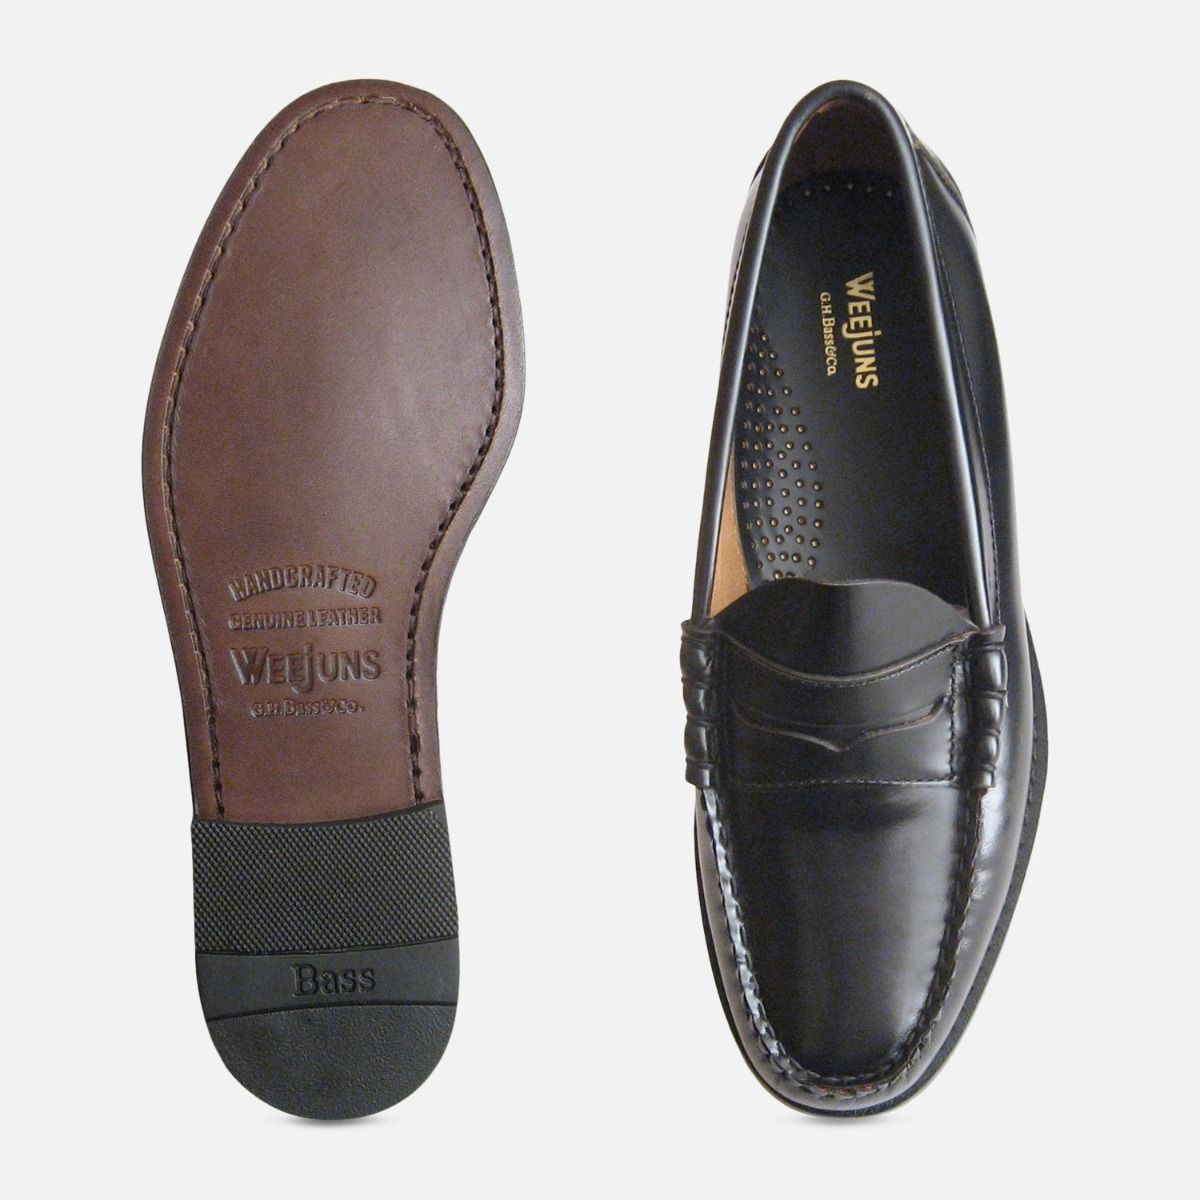 weejuns mens loafers online -